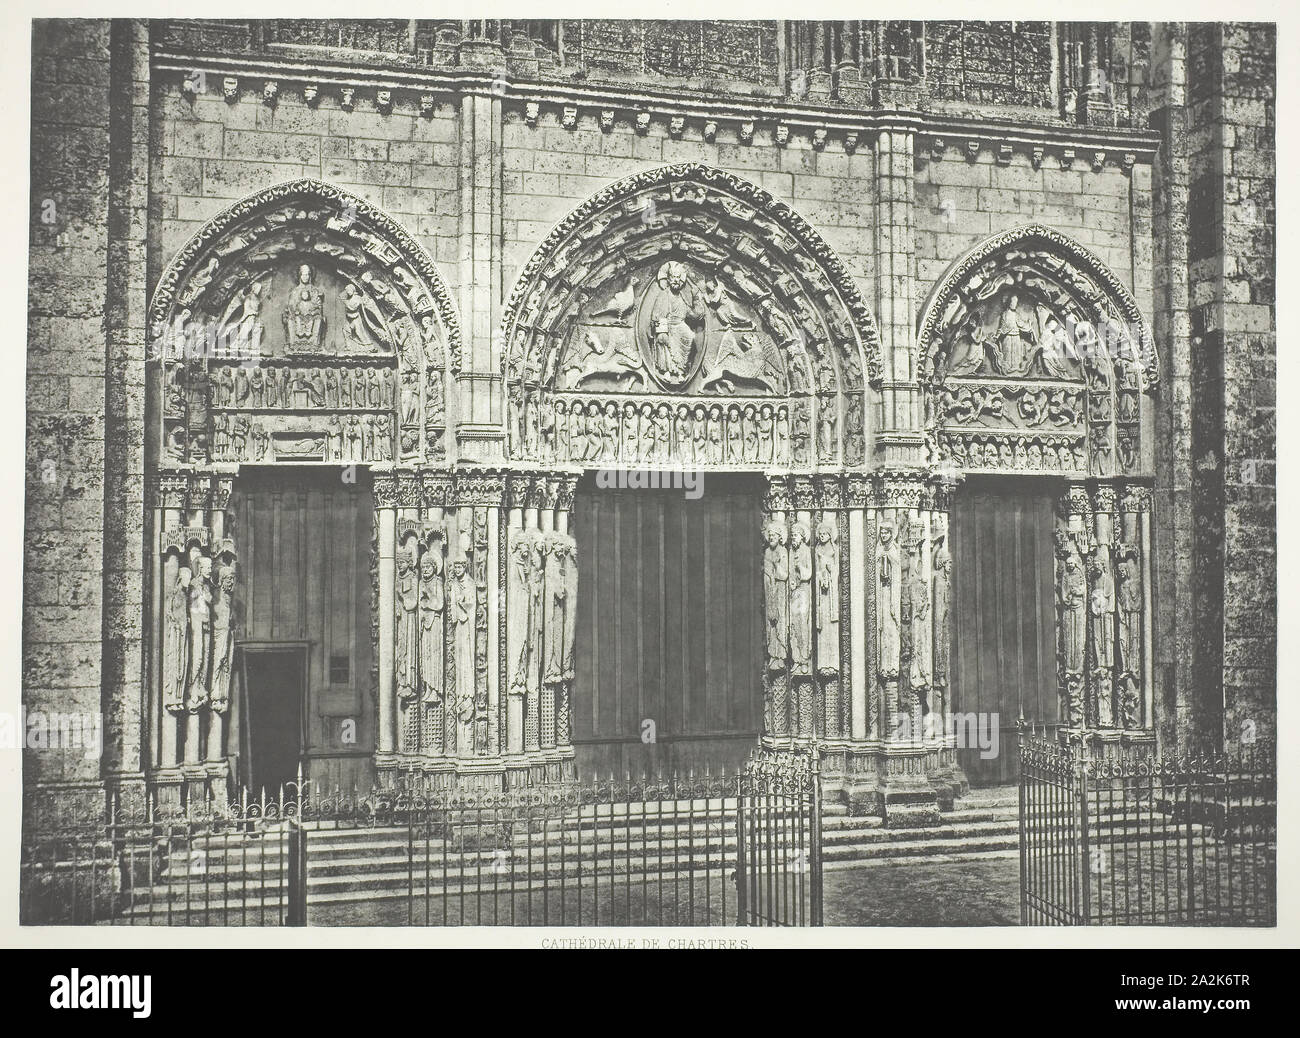 Main Portal, Chartres Cathedral, c. 1860, printed c. 1873, Édouard Baldus, French, born Germany, 1813–1889, France, Heliogravure (photogravure), 30.7 × 42.5 cm (image), 45.3 × 63.4 cm (paper Stock Photo